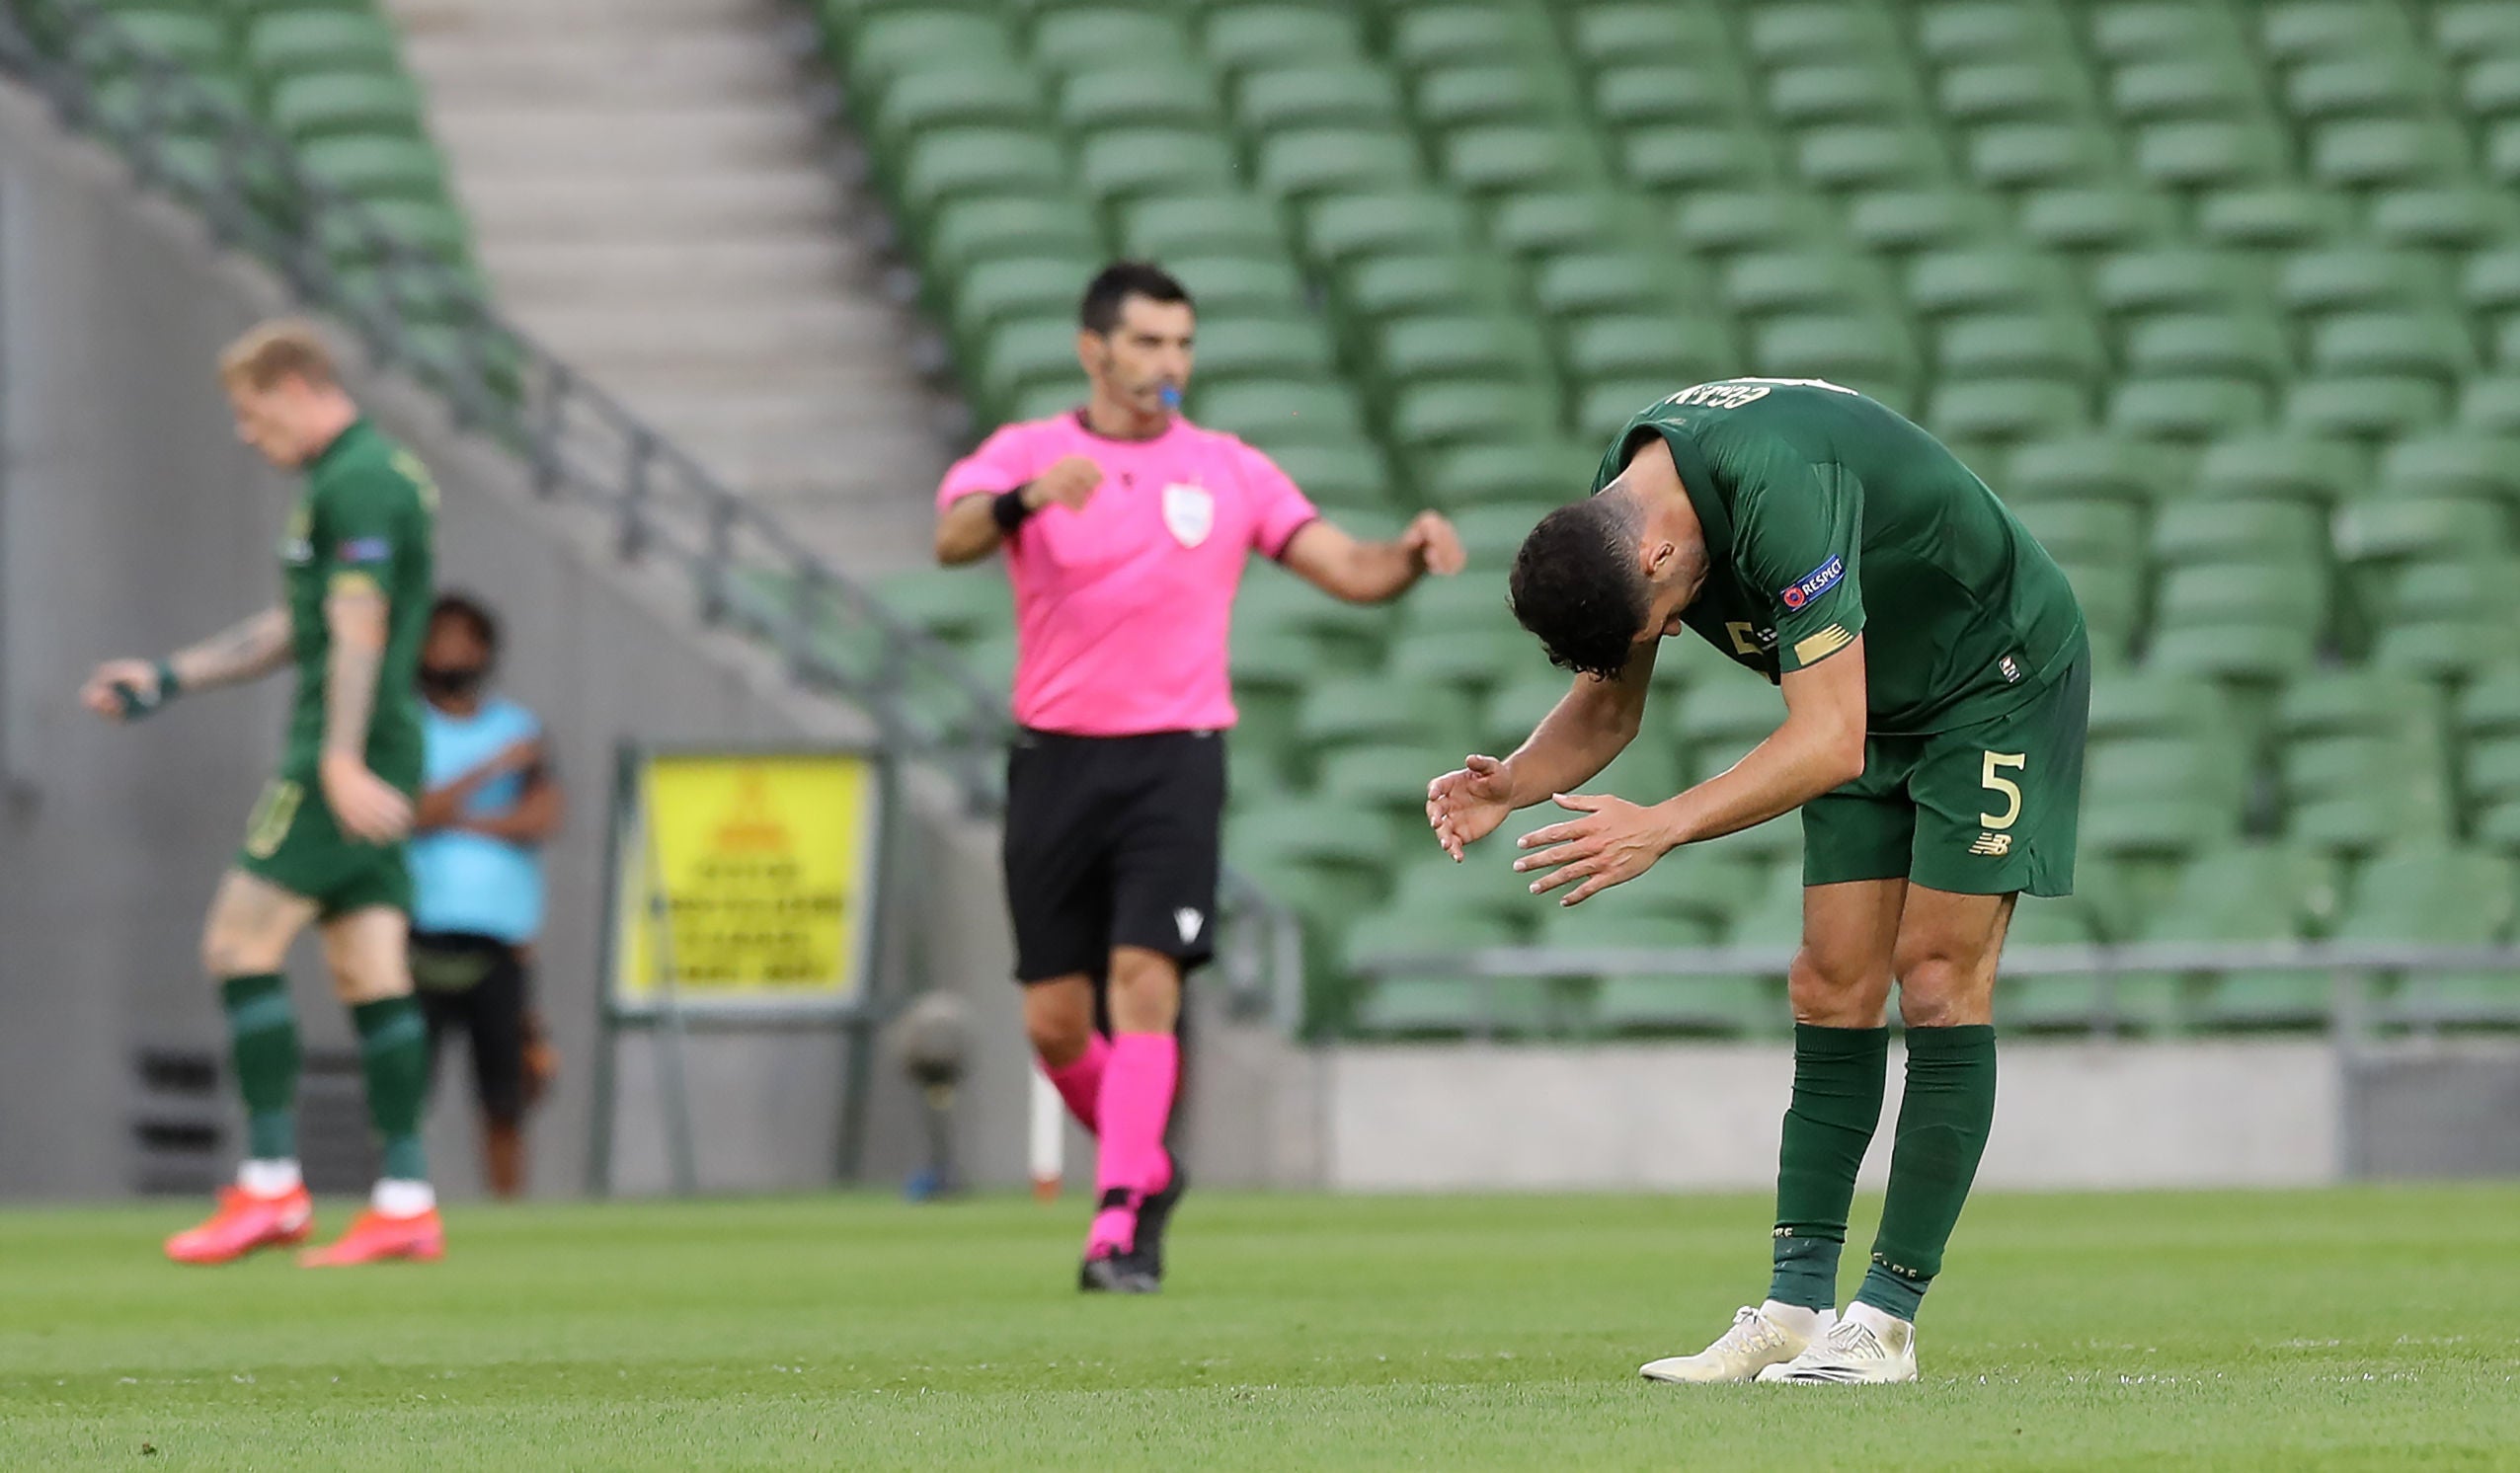 The Republic of Ireland suffered a disappointing defeat at the hands of Finland